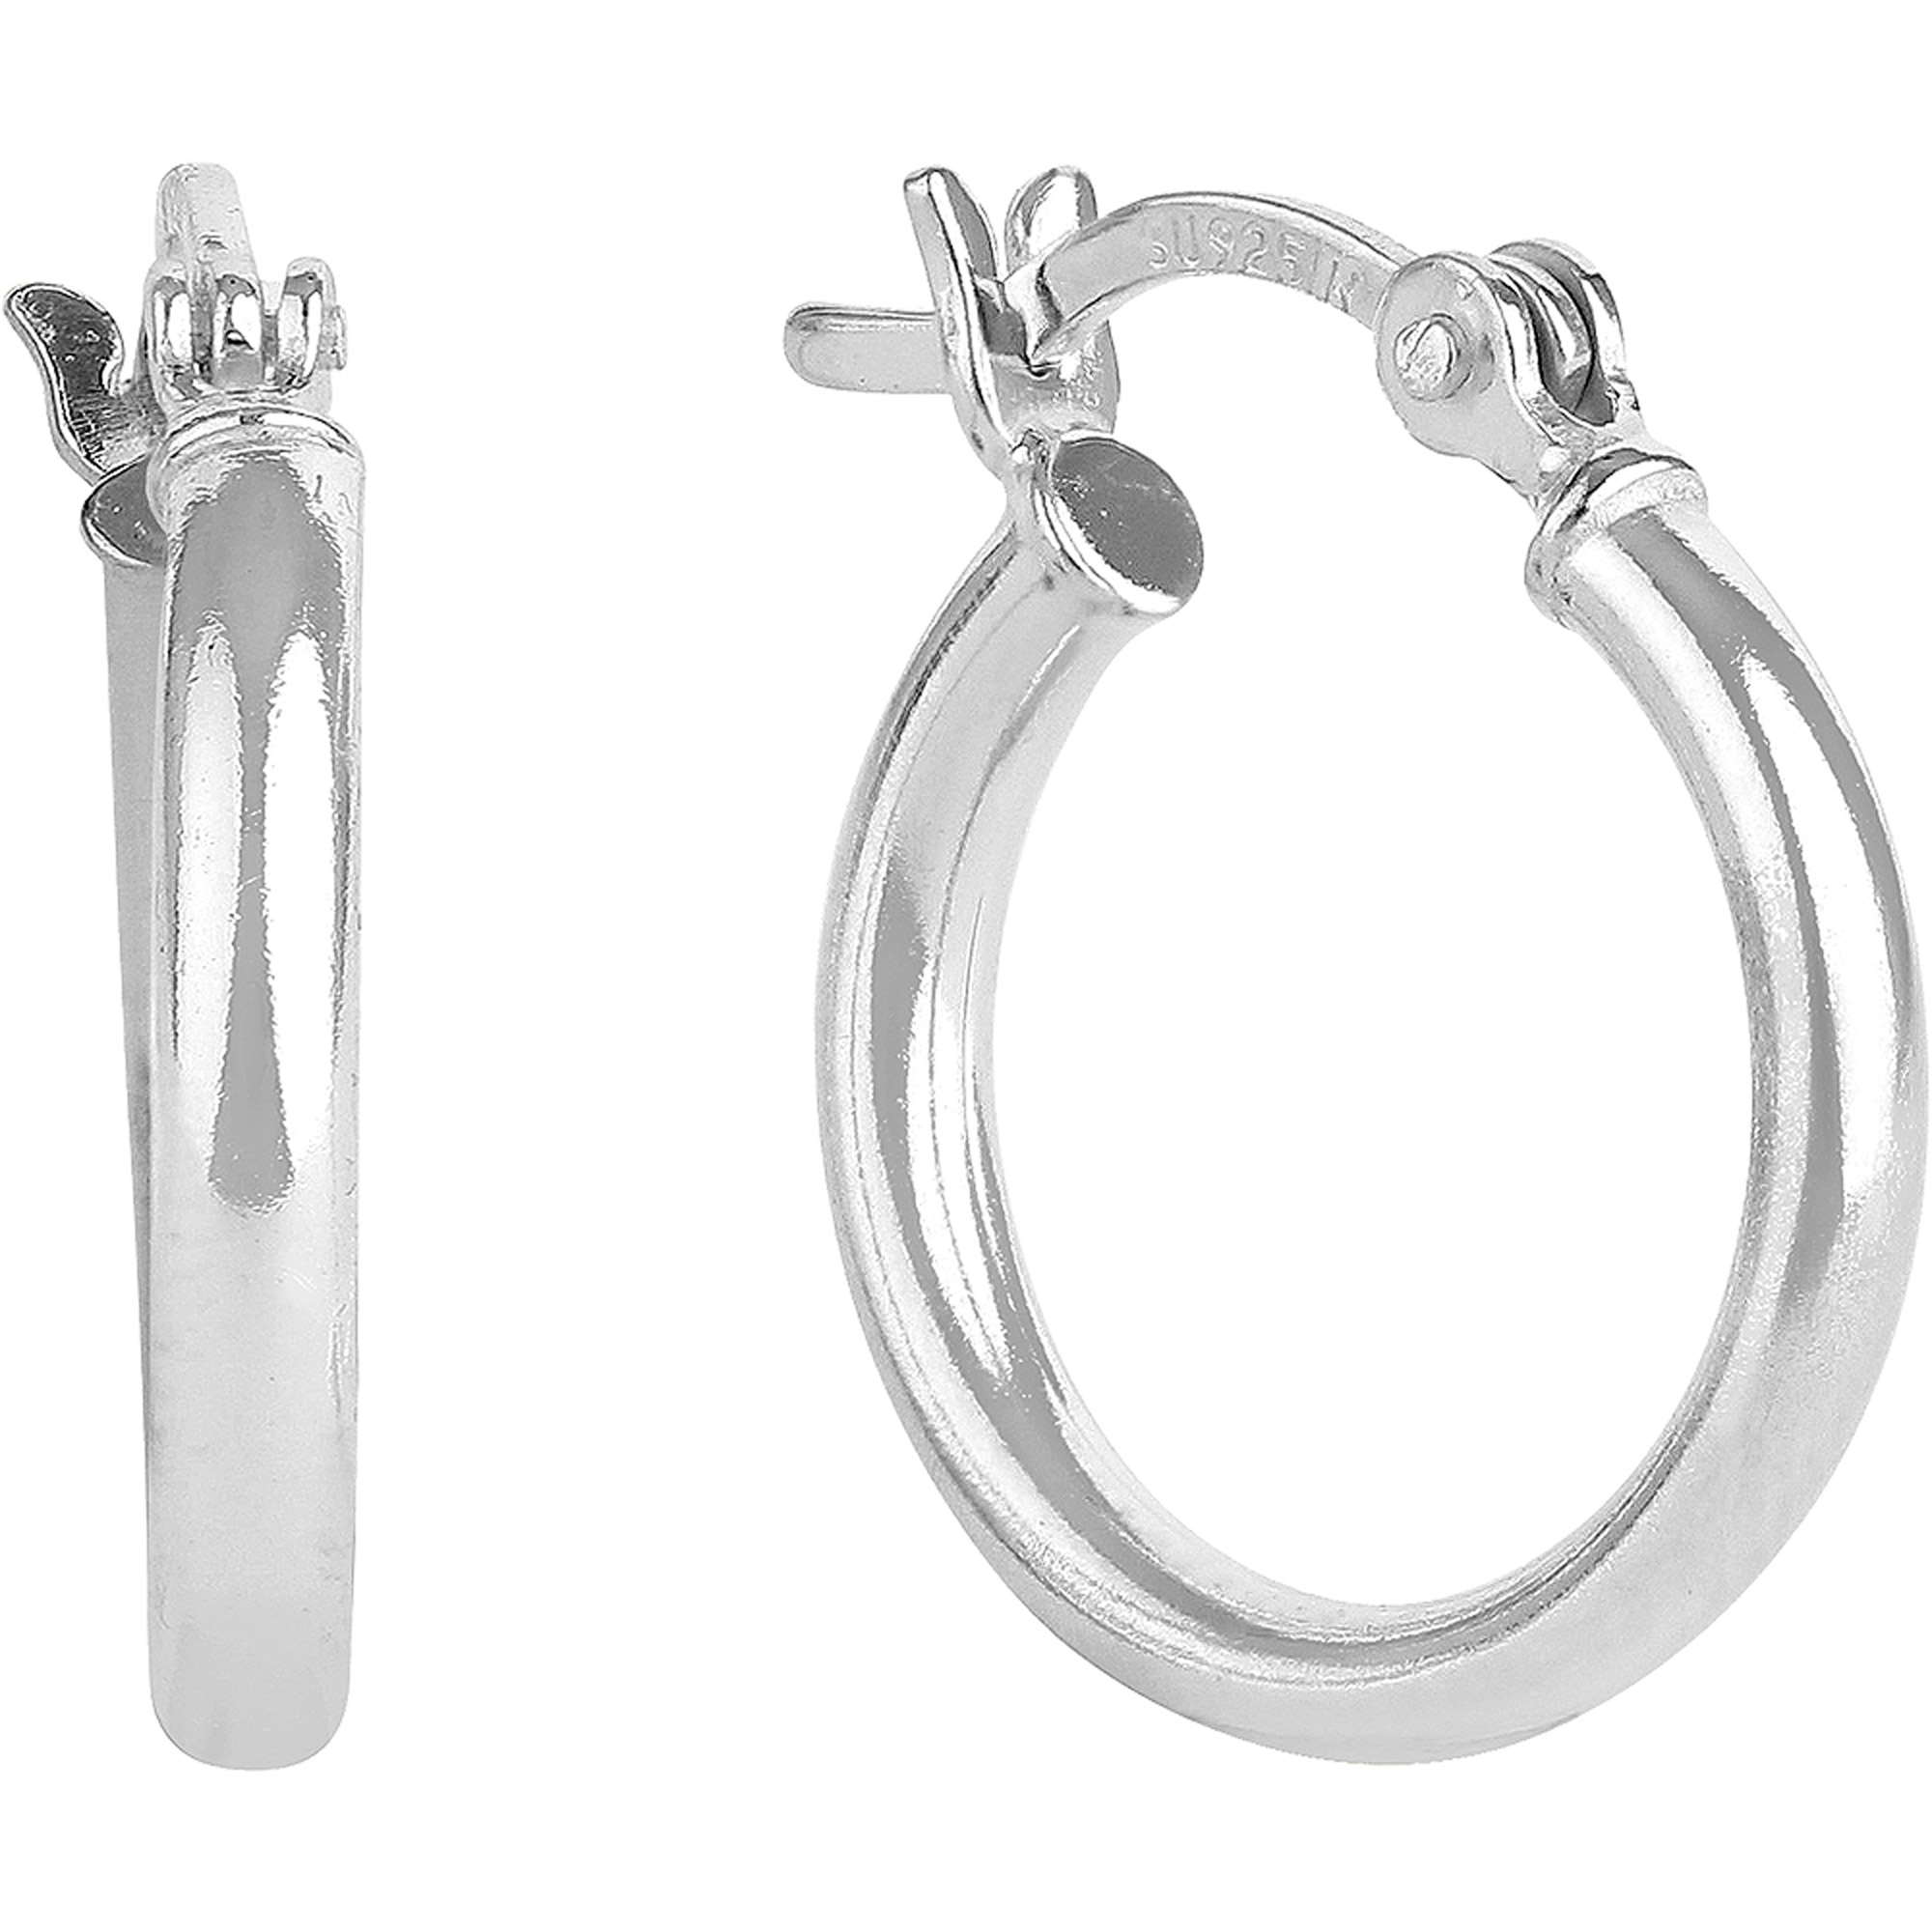 Brilliance Fine Jewelry Click Top Hoop Earrings in Sterling Silver 15MM - image 4 of 5